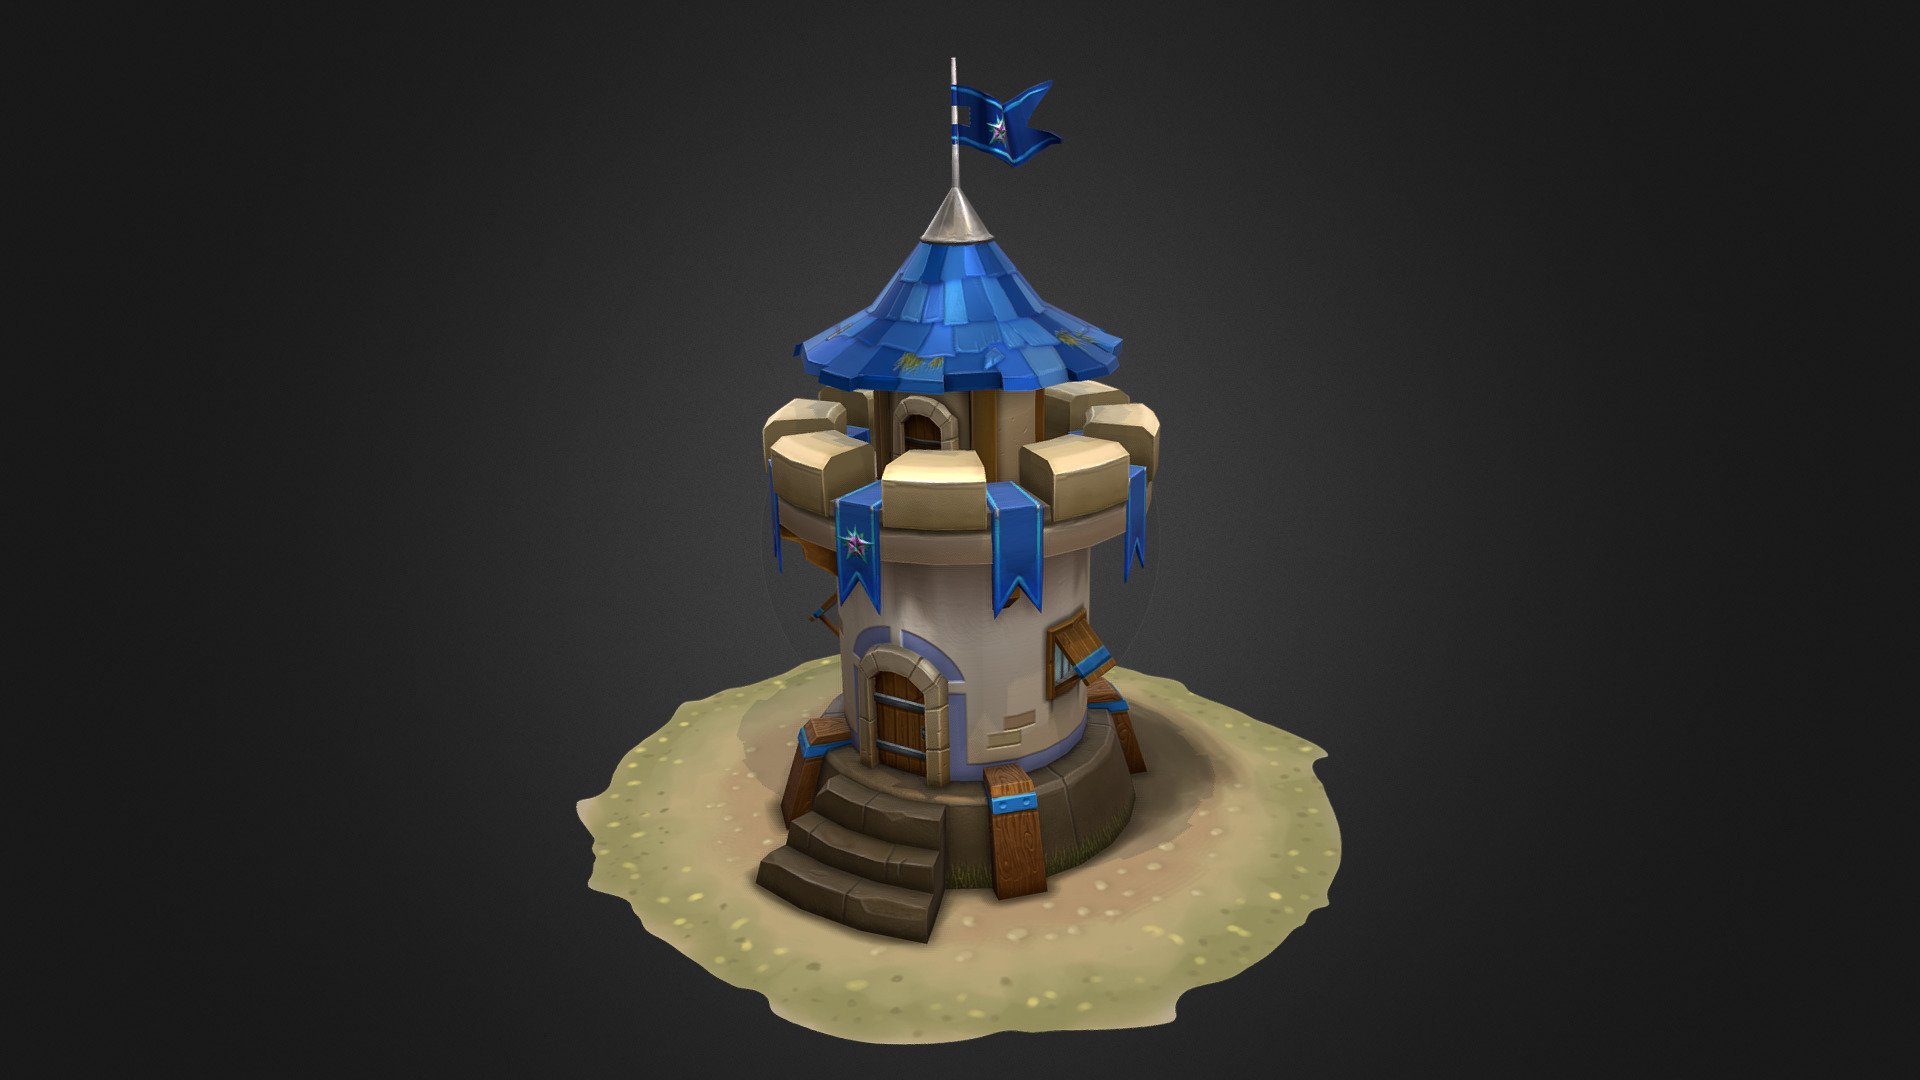 Defense Tower inspired from SiegeCraft Commander.

Modeling : Spacedraw

HandPainting : Artflow / MedibangPaint

UVs Tweaking : PSTouch - Defense Tower (done on a phone with Spacedraw) - Download Free 3D model by hansolocambo 3d model